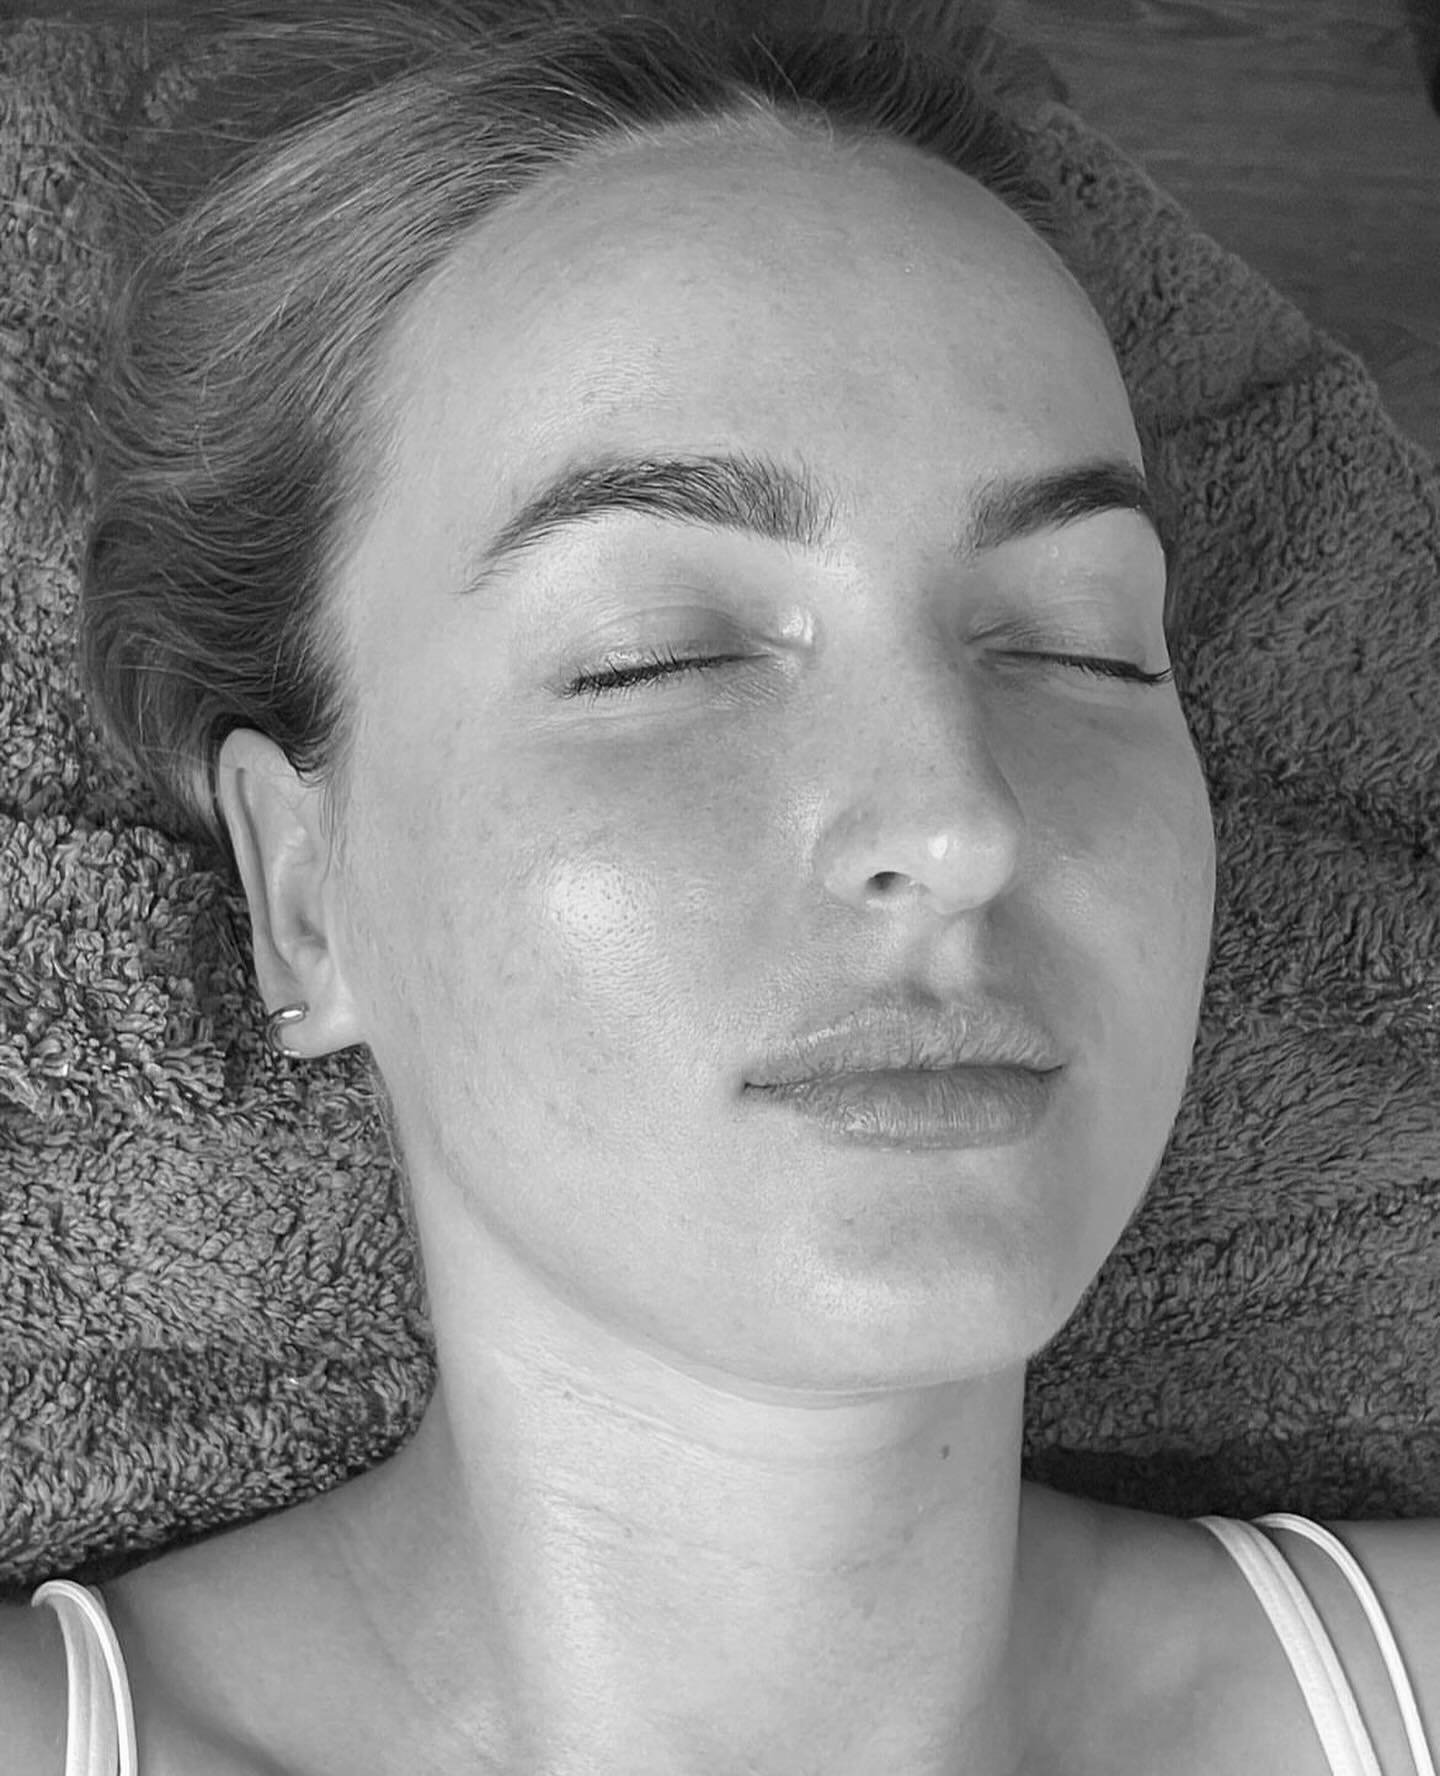 Weekend post facial glows with #lucieexpert @skinandbeautybyrb. 

| THE COTSWOLDS |

#LucieAtHome #LucieSkin